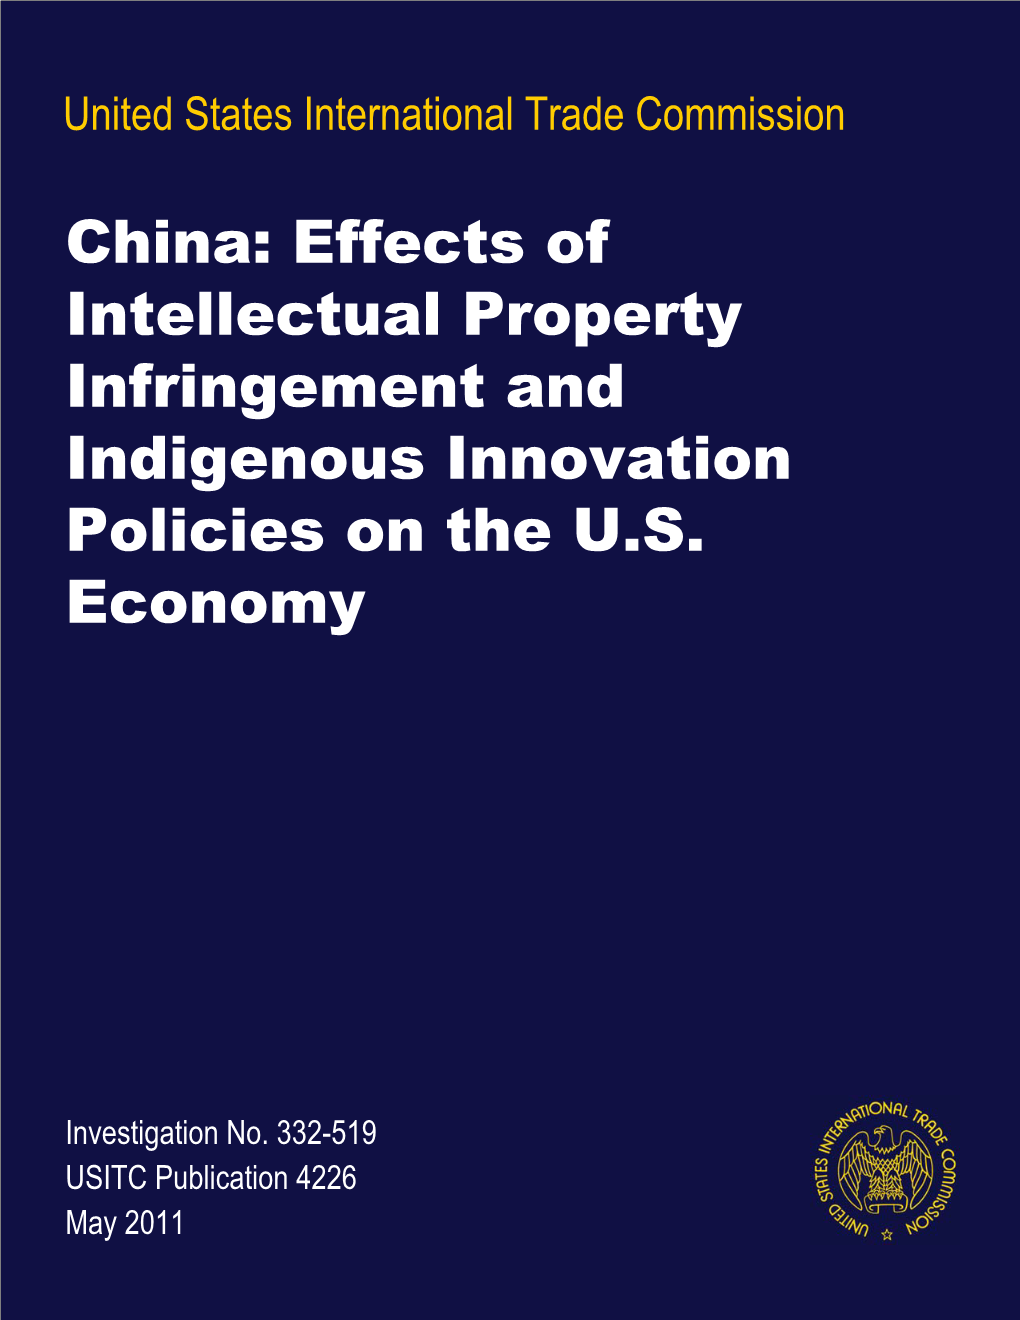 China: Effects of Intellectual Property Infringement and Indigenous Innovation Policies on the U.S